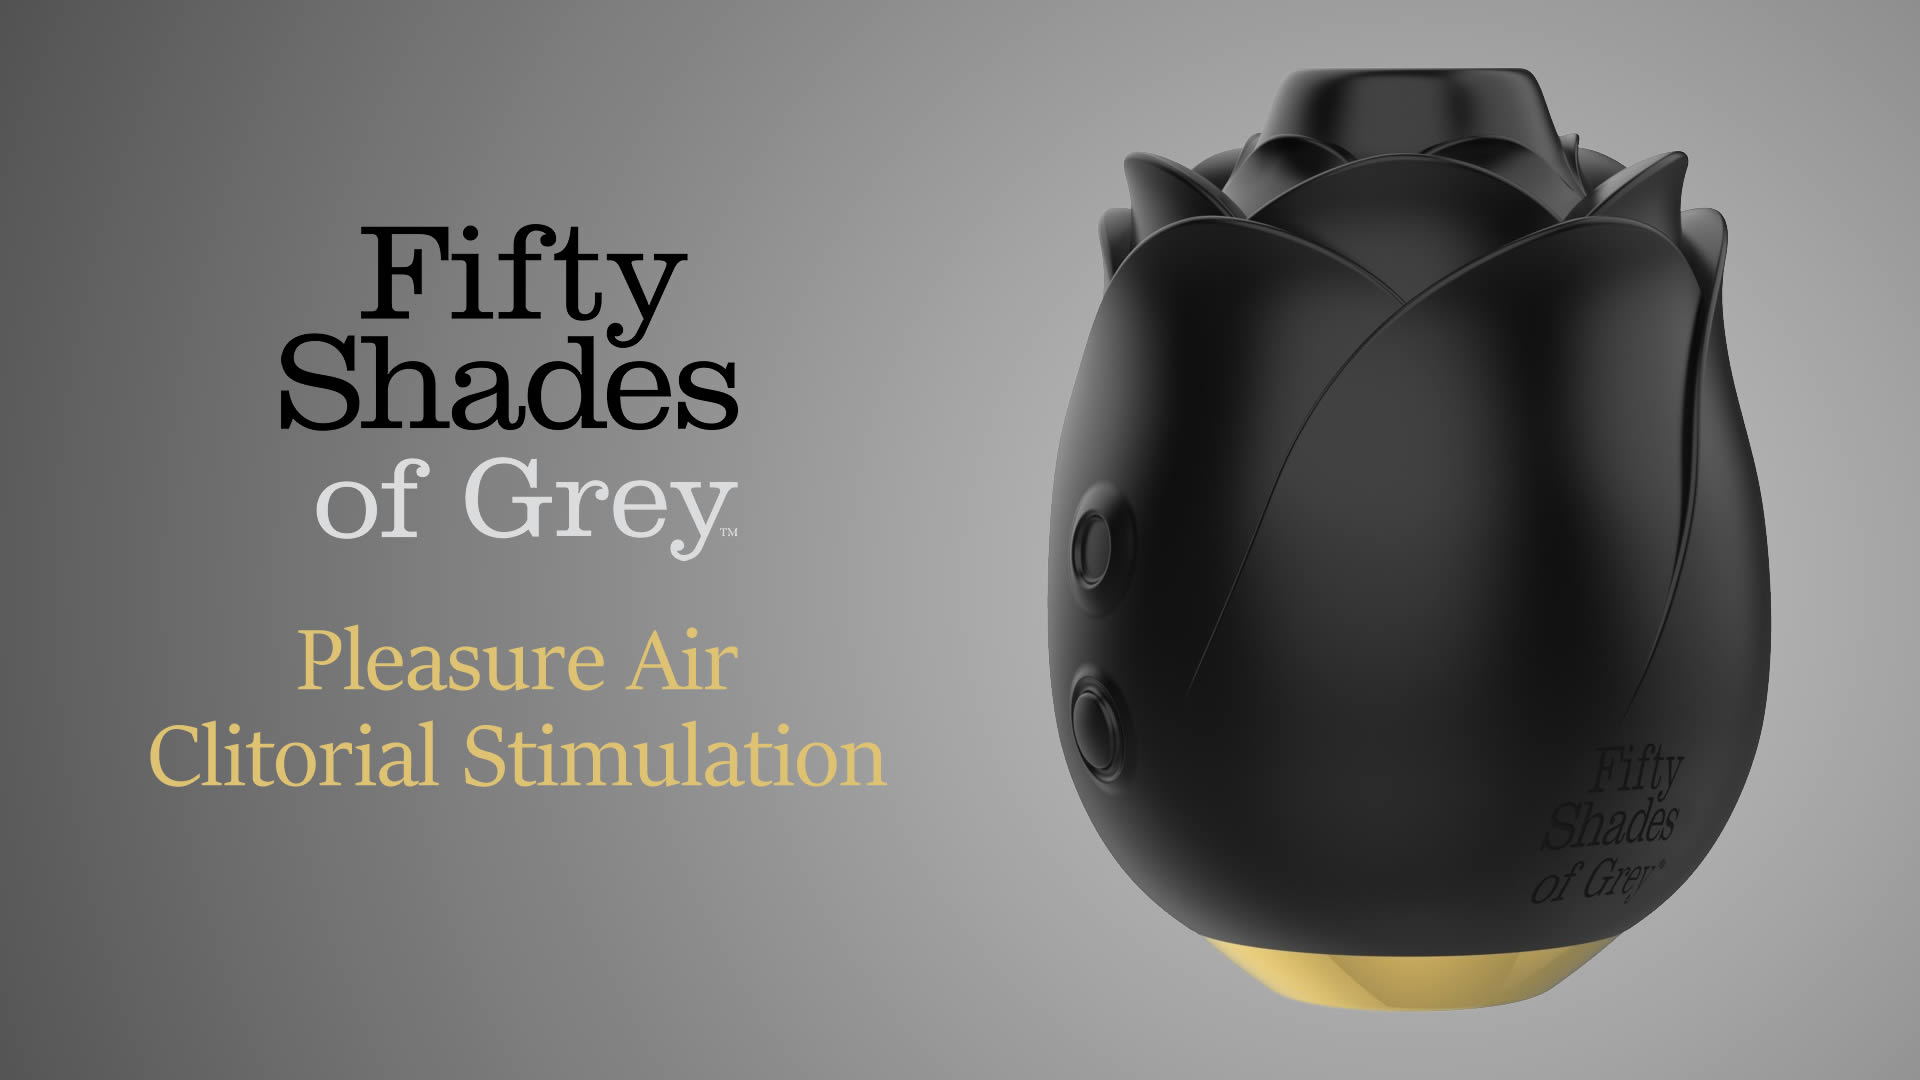 Fifty Shades of Grey Clitoral Suction Stimulator